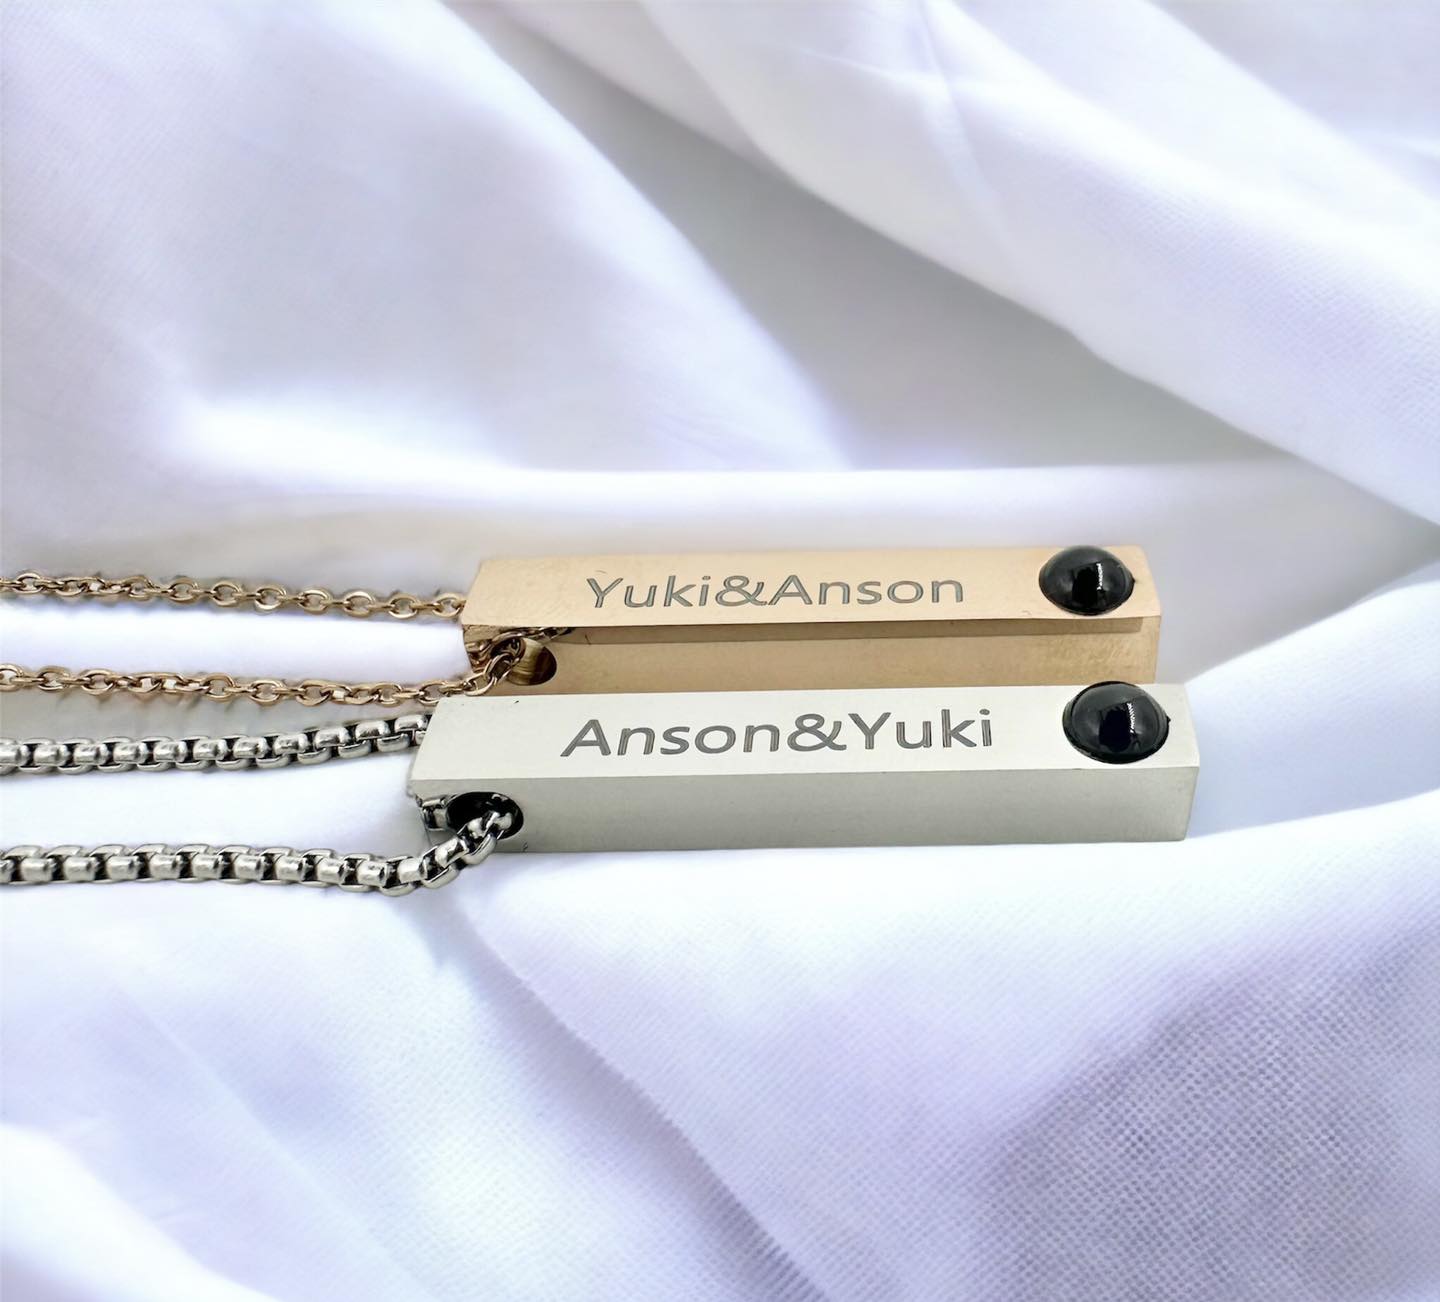 Cuswelry - The One (Unisex) Necklace